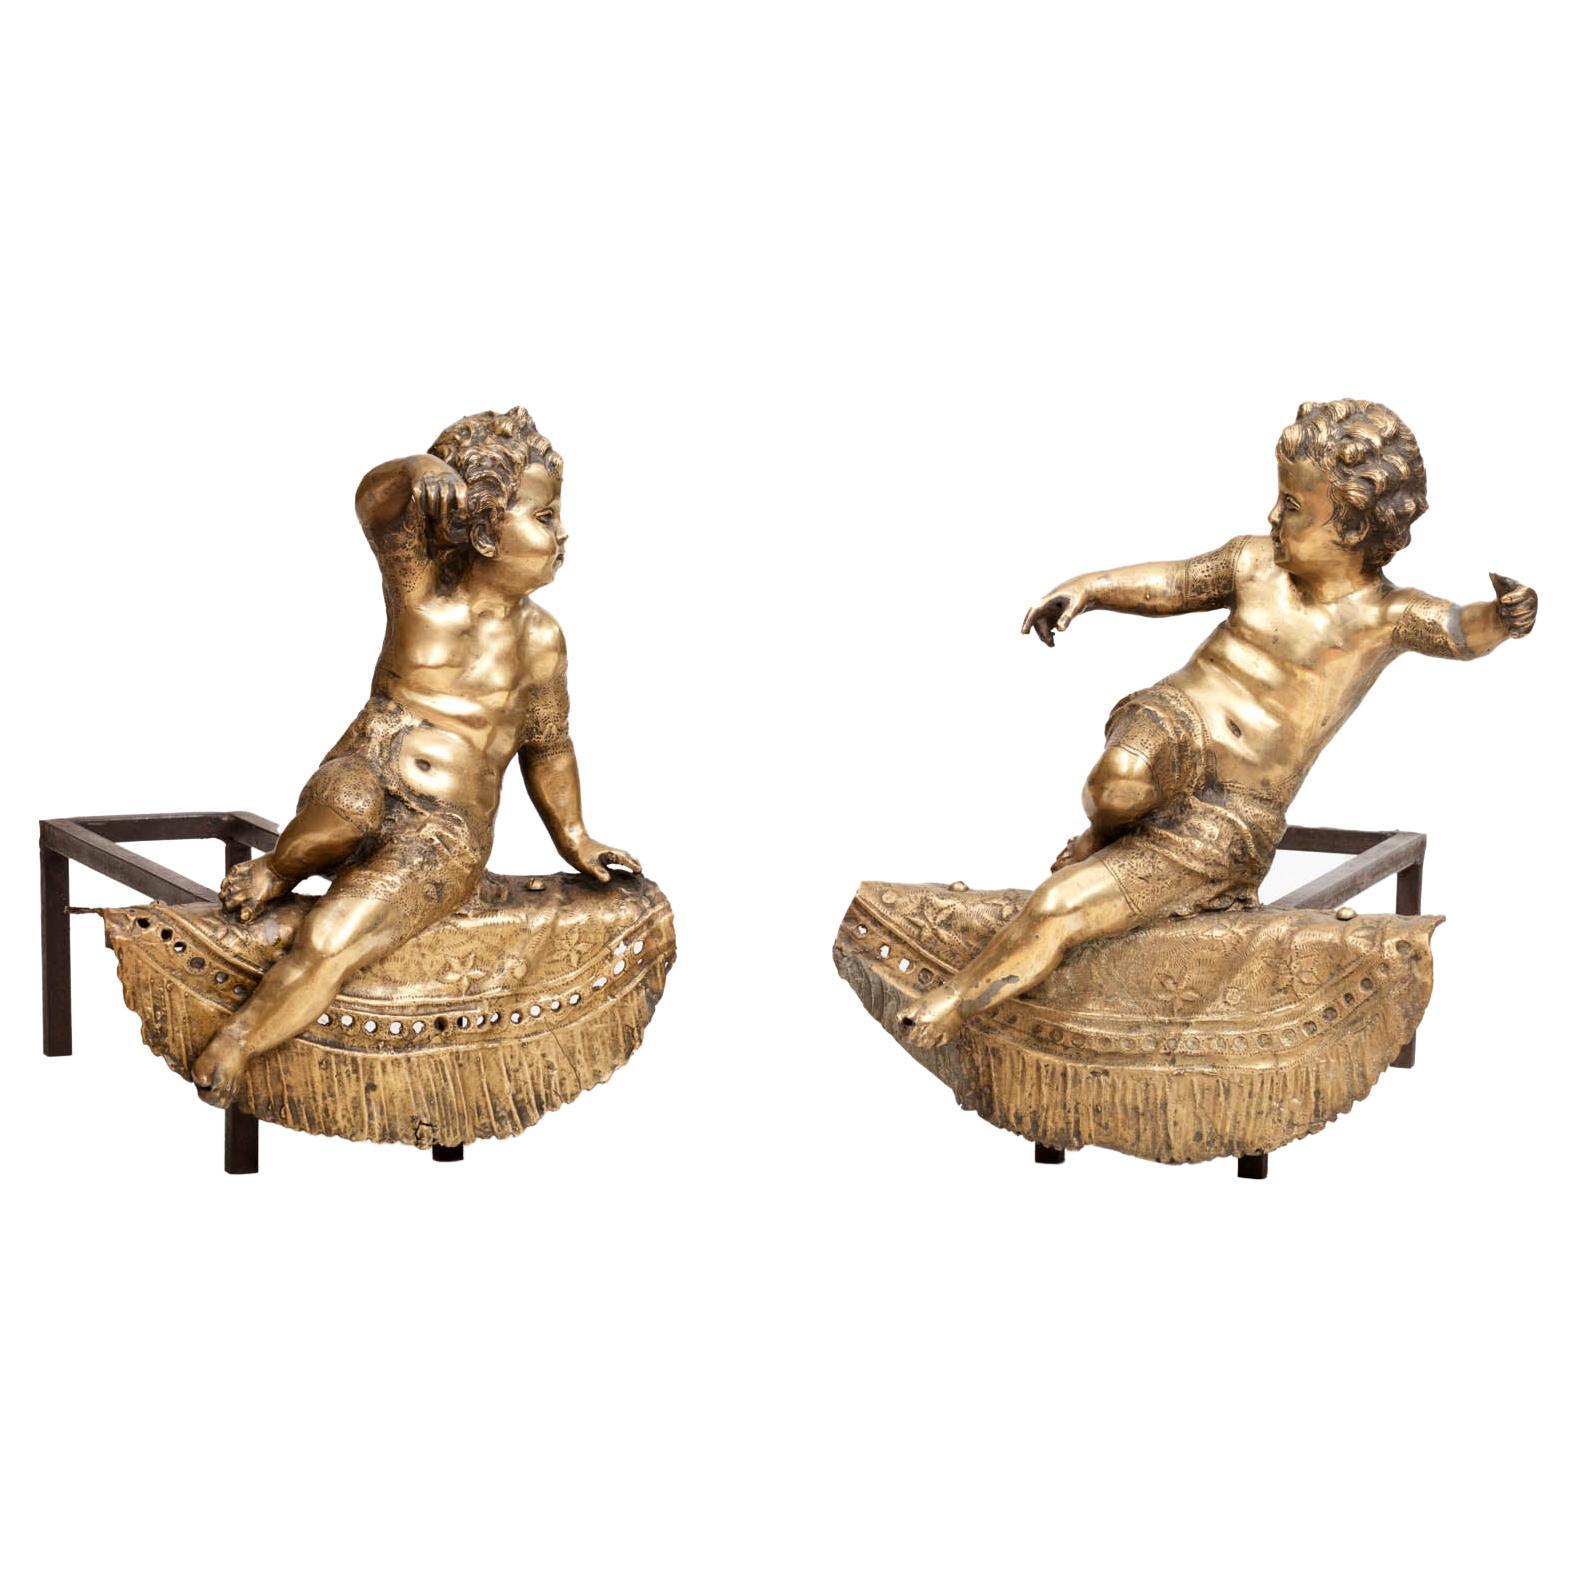 Pair of 19th Century Brass Fire Dogs Modeled as Cherubs For Sale